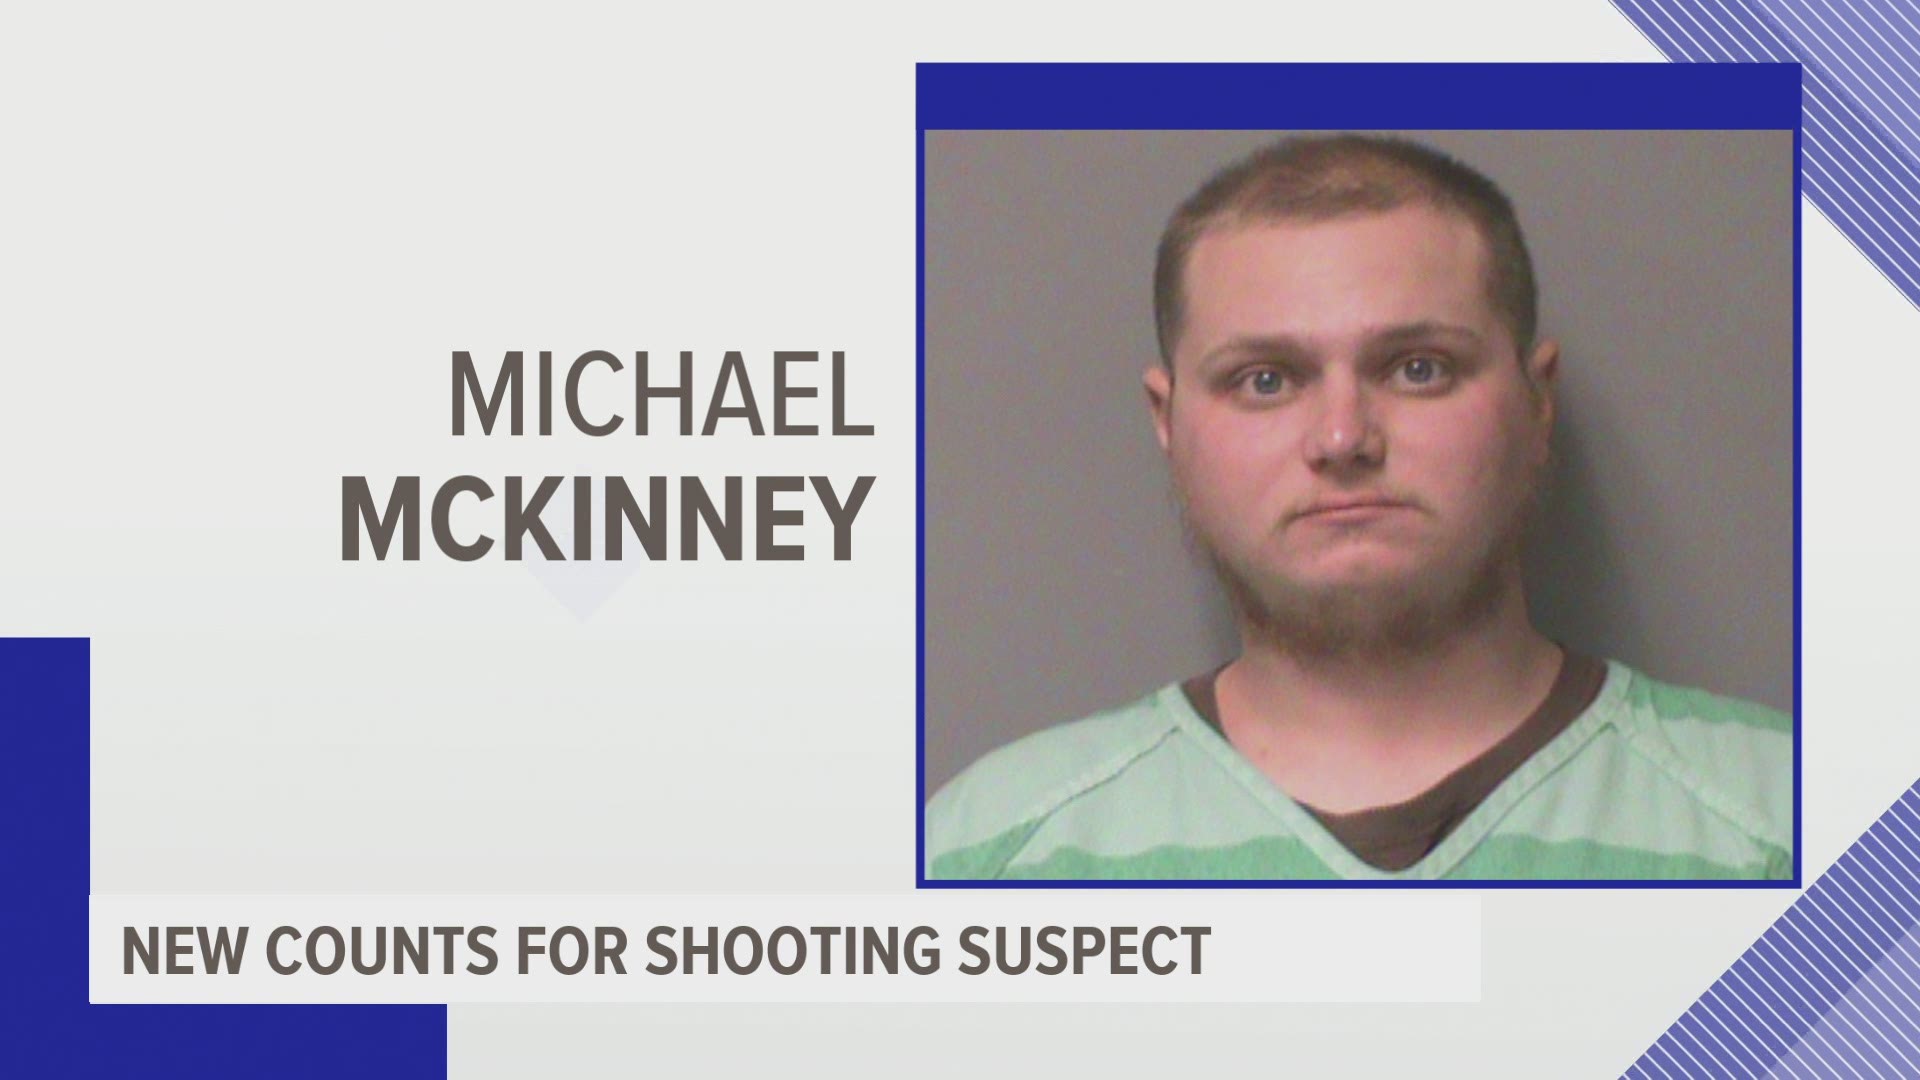 25-year-old Michael McKinney has been jailed since his arrest hours after the Dec. 6 shooting near the Iowa Capitol in Des Moines.